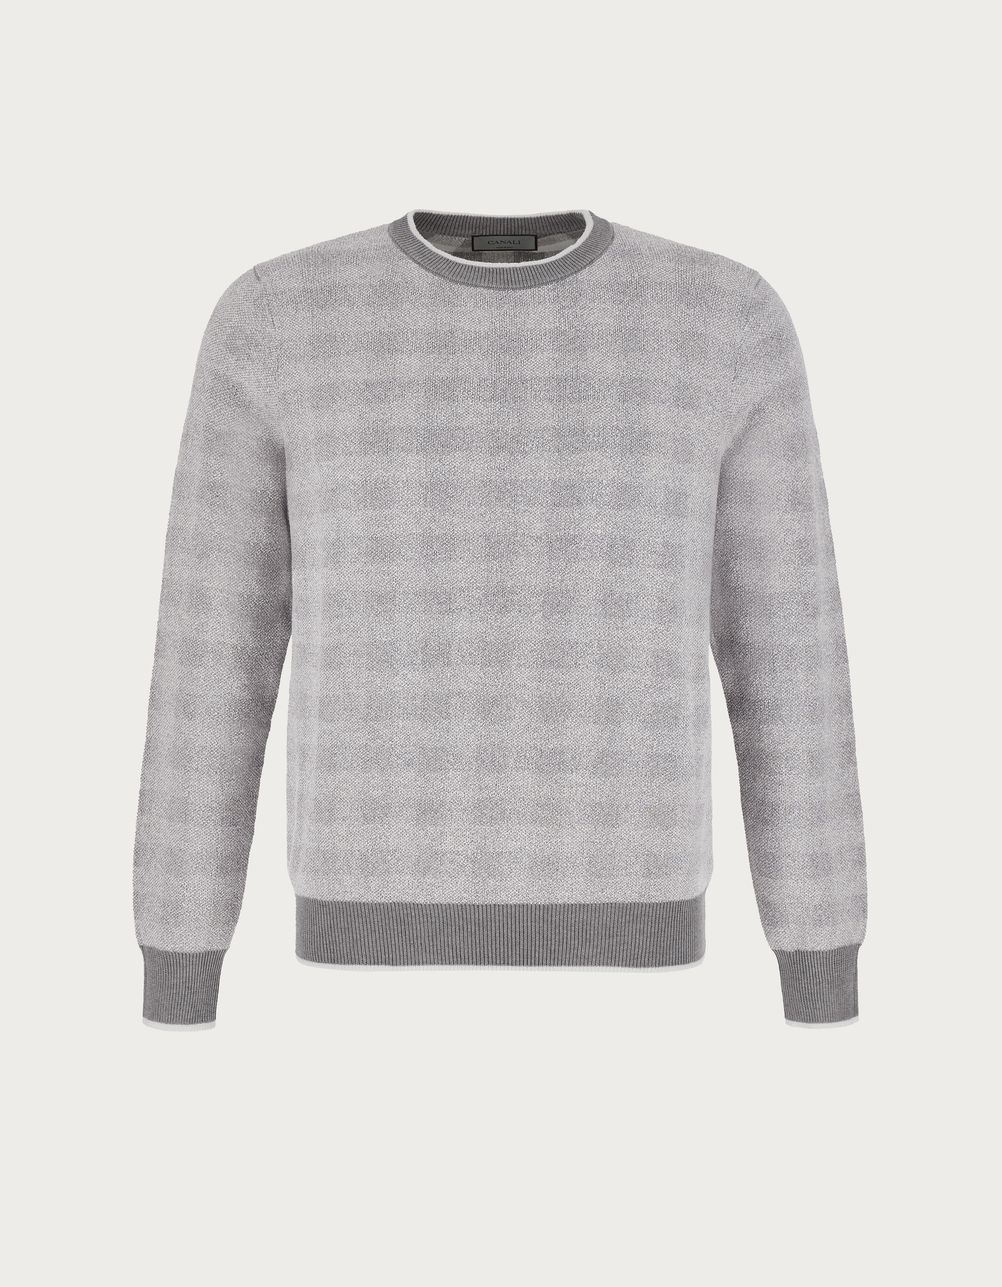 Grey and ivory crew-neck in jacquard cotton